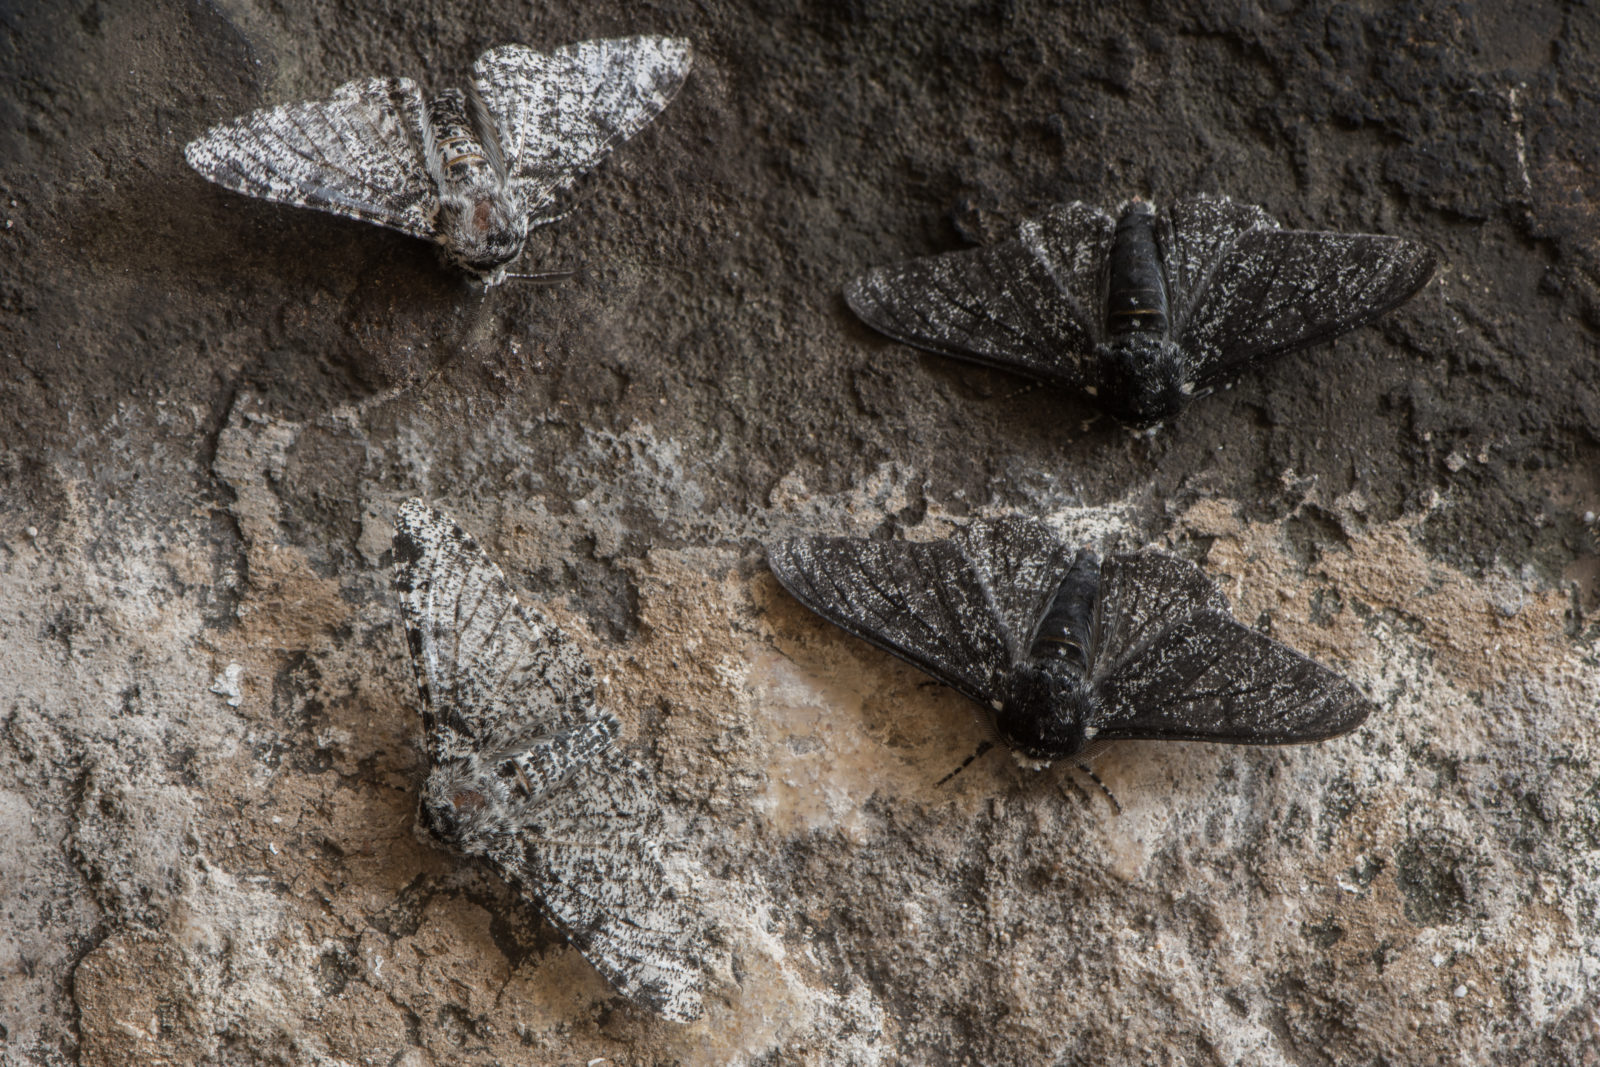 Peppered moth (Biston betularia) melanic and light form. Moths in the family Geometridae showing relative camouflage of f. cabonaria, the result of industrial melanism